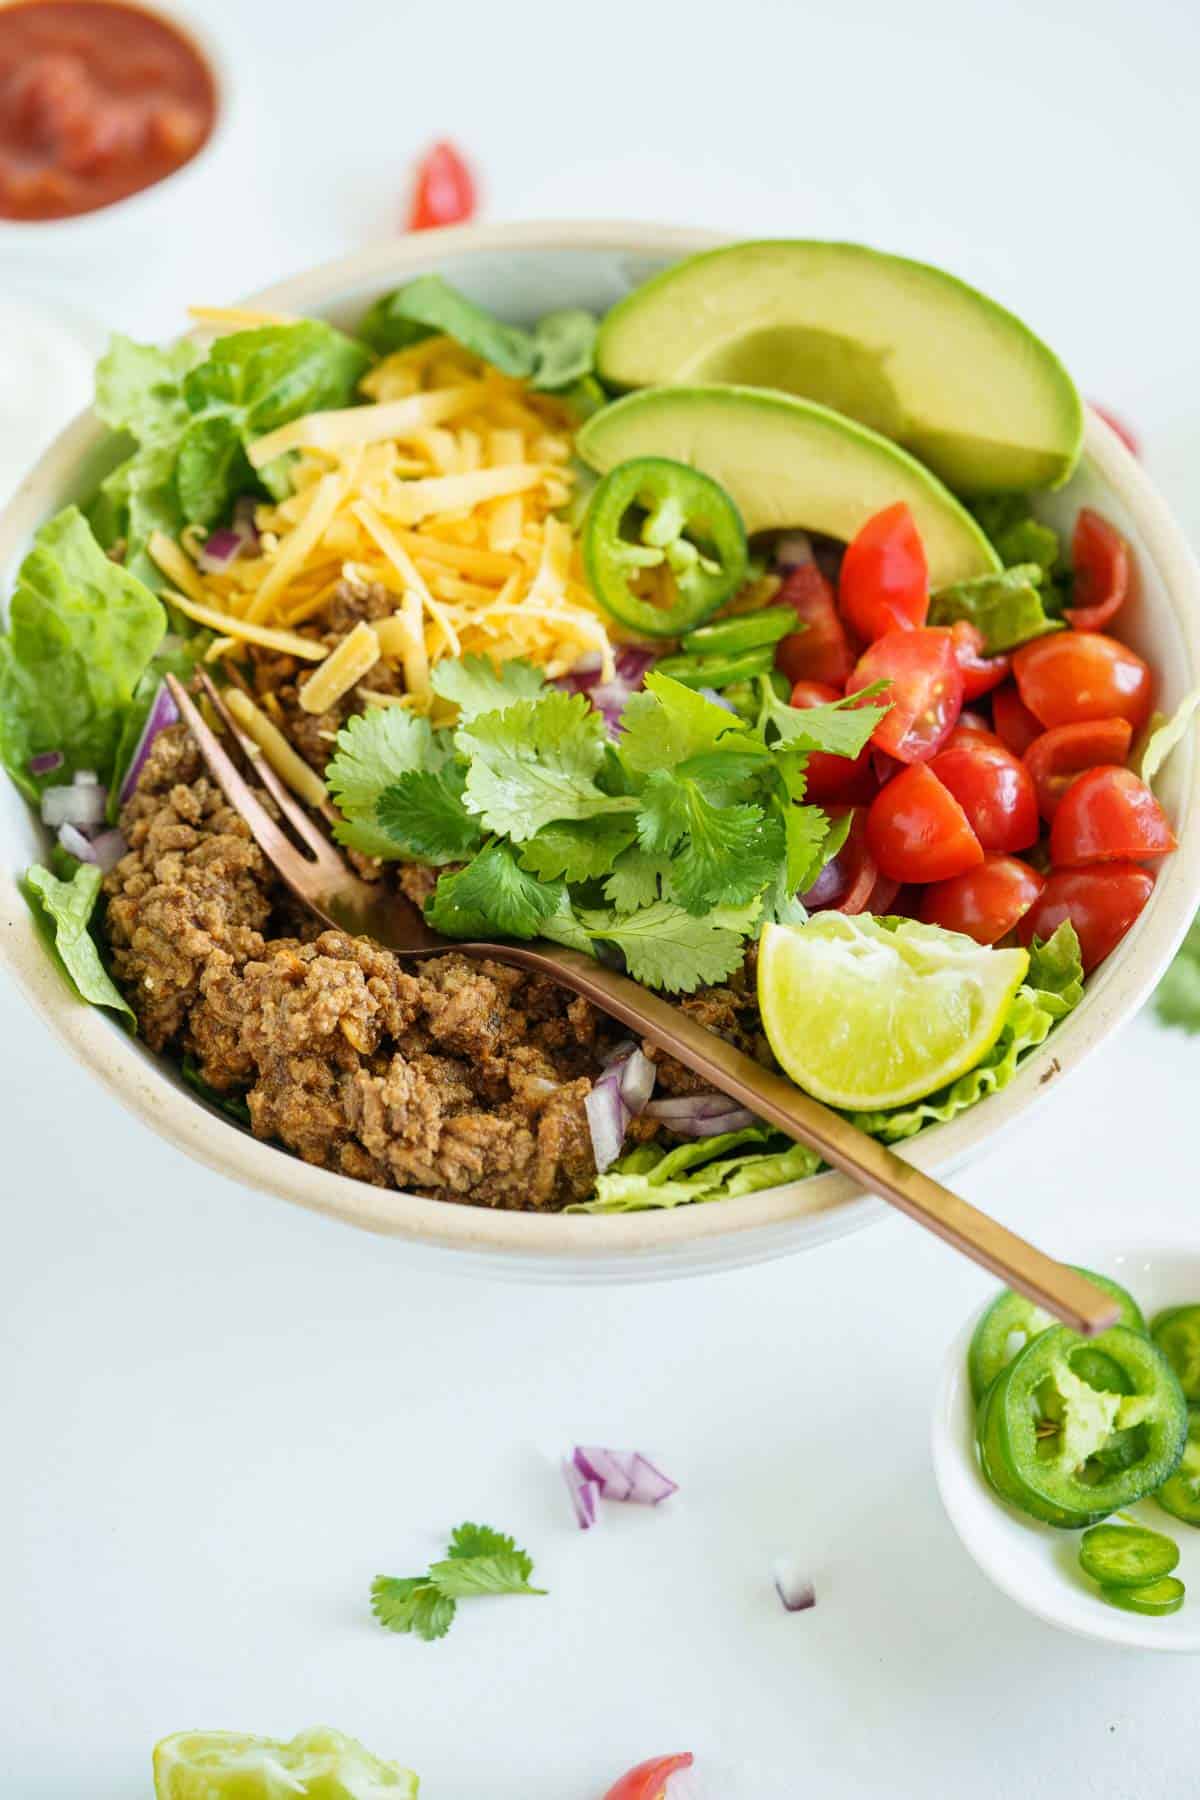 A ground beef taco salad in a bowl with some of the toppings scattered on the table and a small bowl of jalapeno slices next to it.